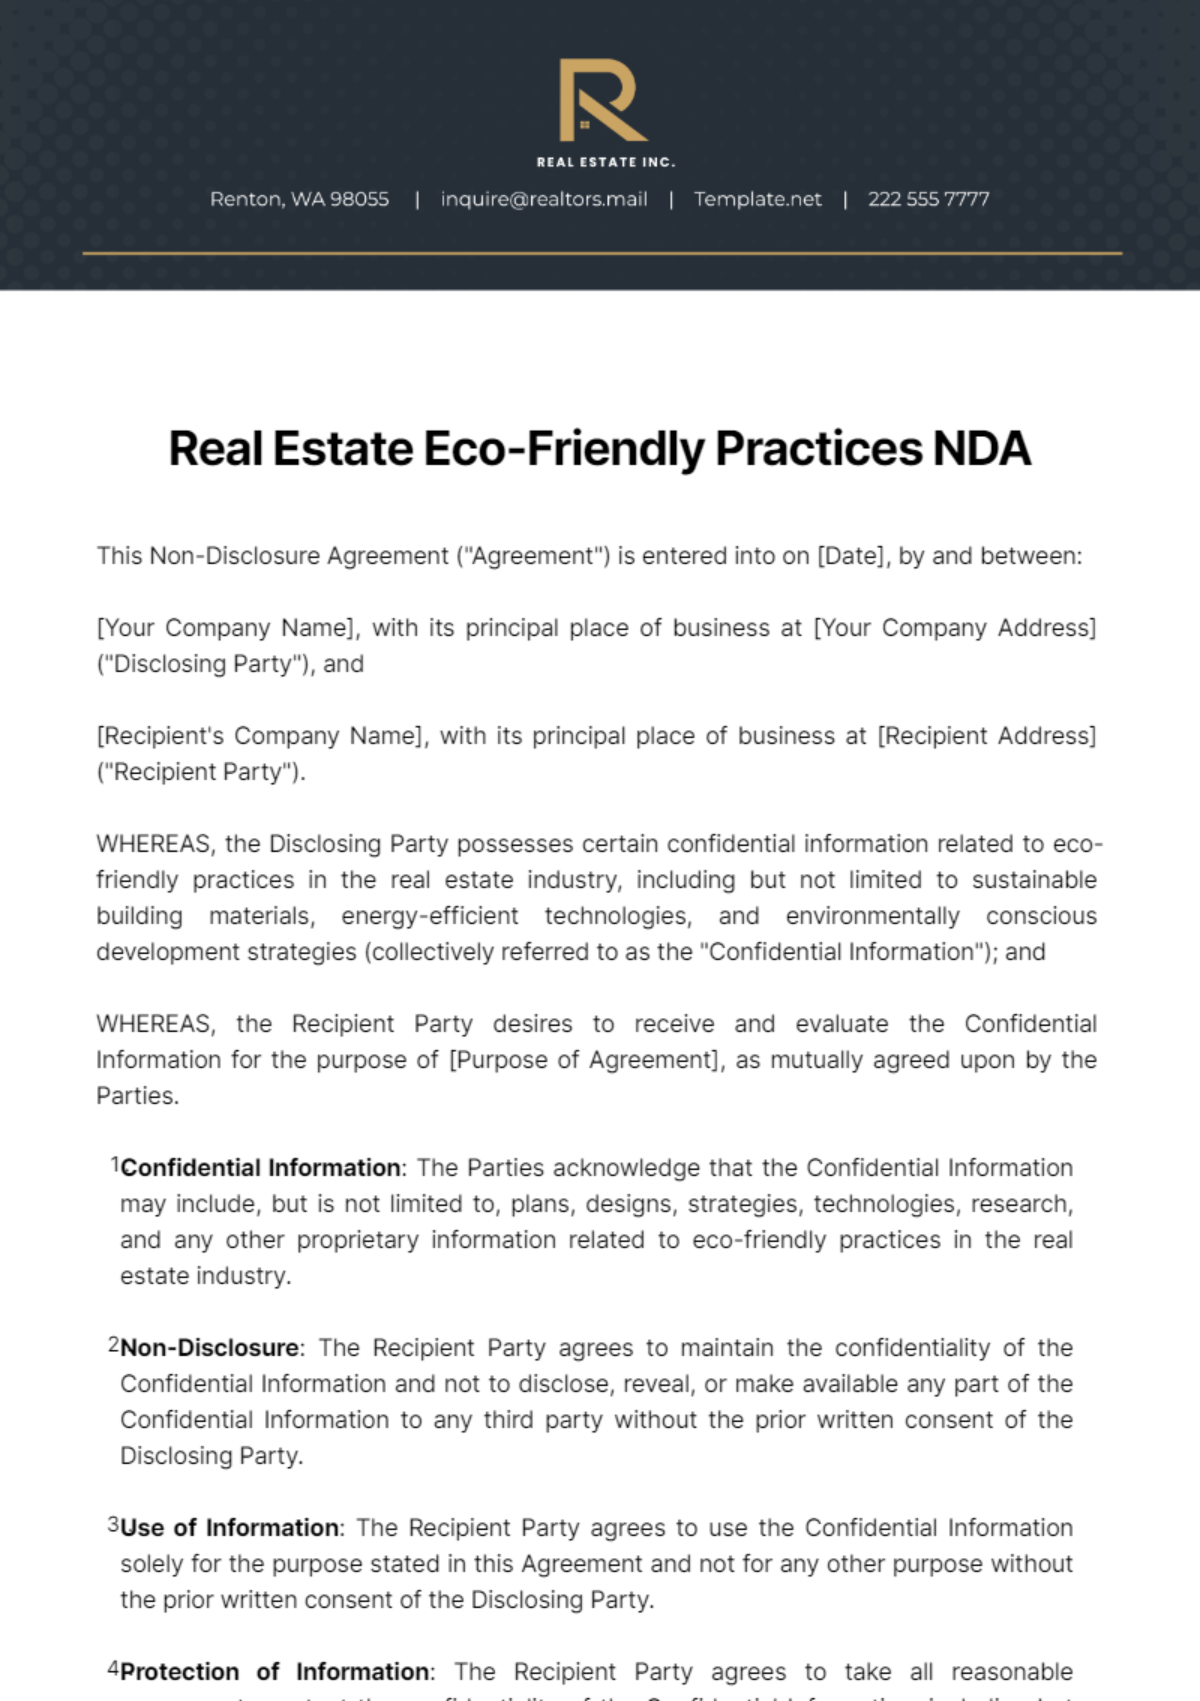 Real Estate Eco-Friendly Practices NDA Template